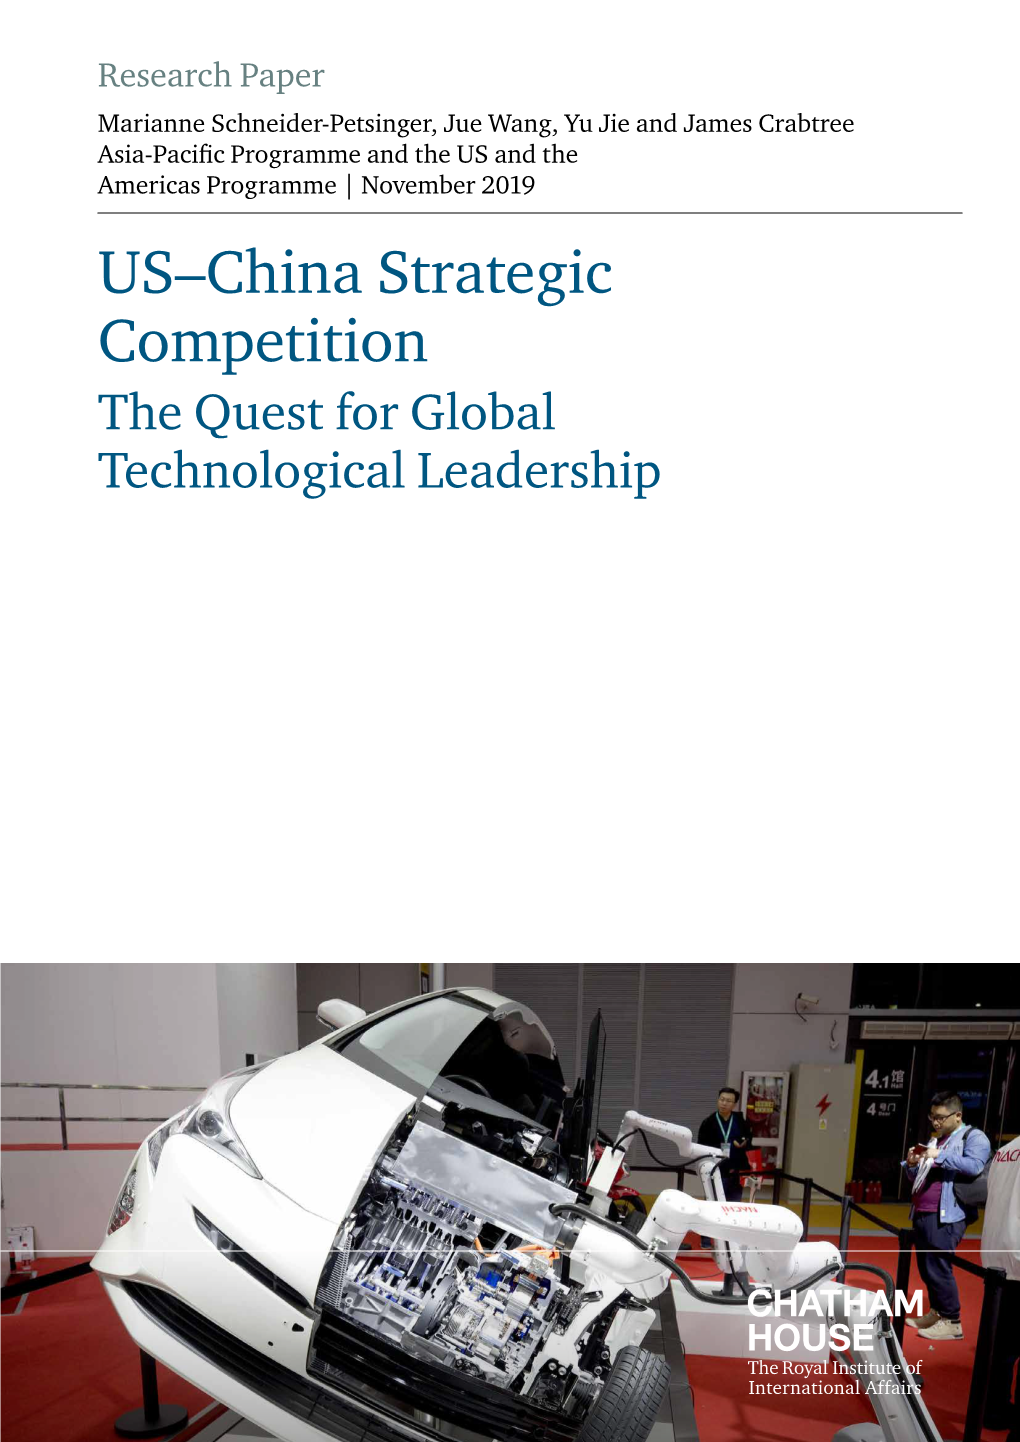 US–China Strategic Competition: the Quest for Global Technological Leadership Schneider-Petsinger, Wang, Jie and Crabtree Chatham House Contents